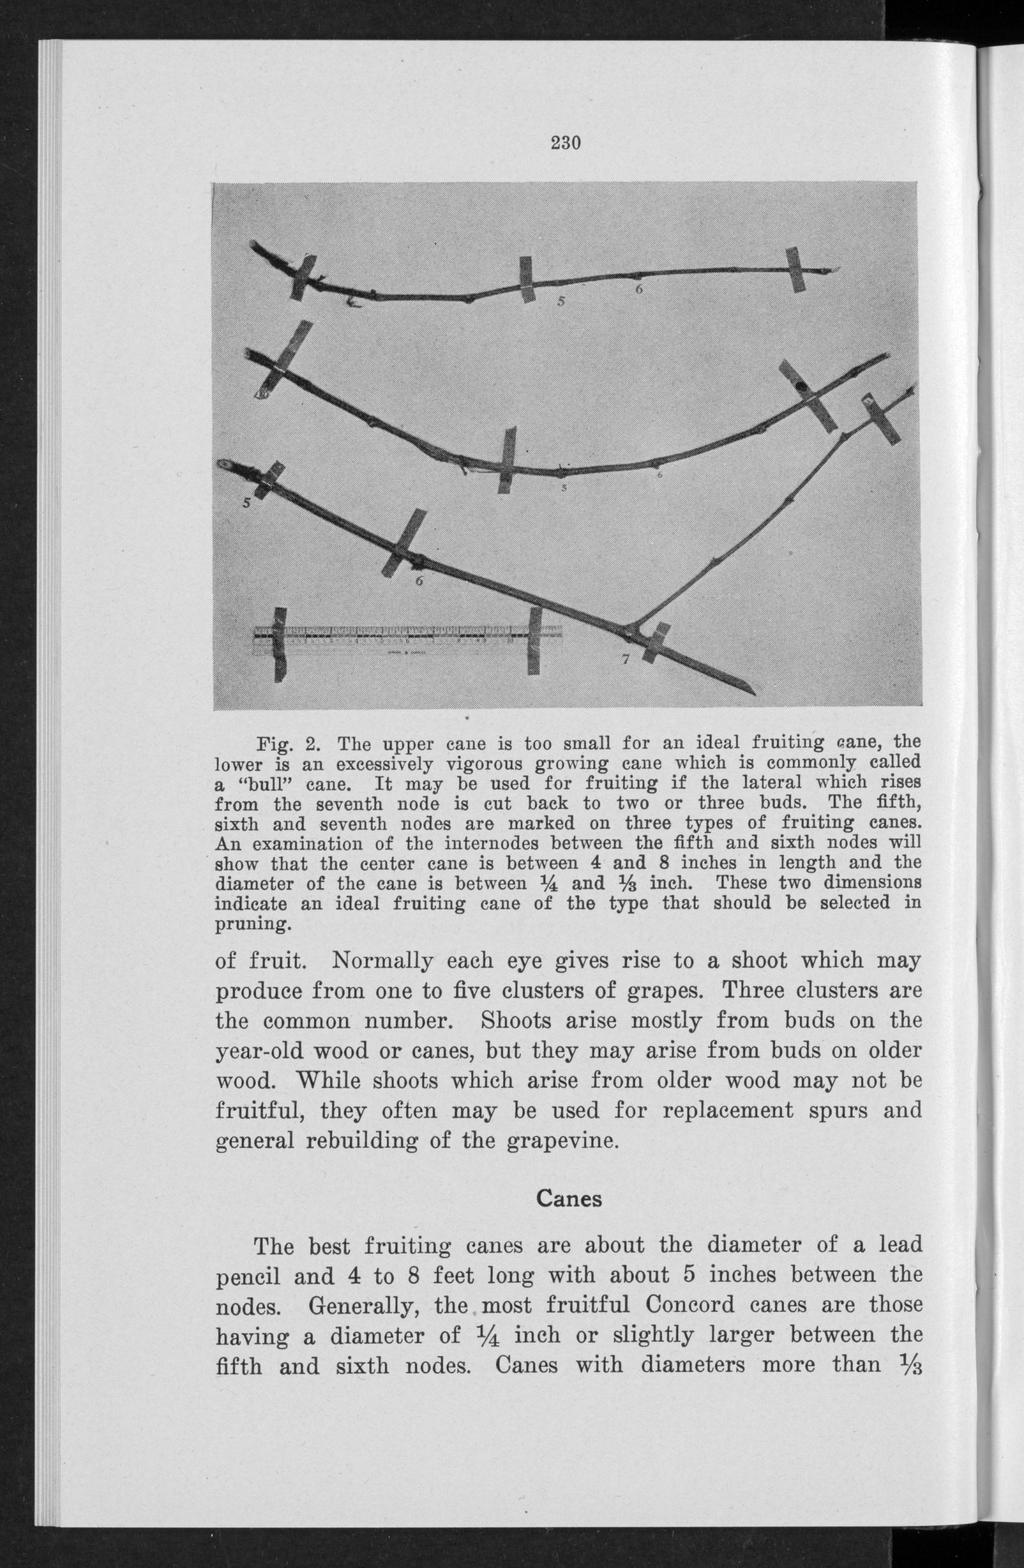 Bulletin P, Vol. 1, No. 7 [1941], Art. 1 230 Fig. 2. The upper eane is too small for an ideal fruiting cane, the lower is an excessively vigorous growing cane which is commonly called a bull cane.